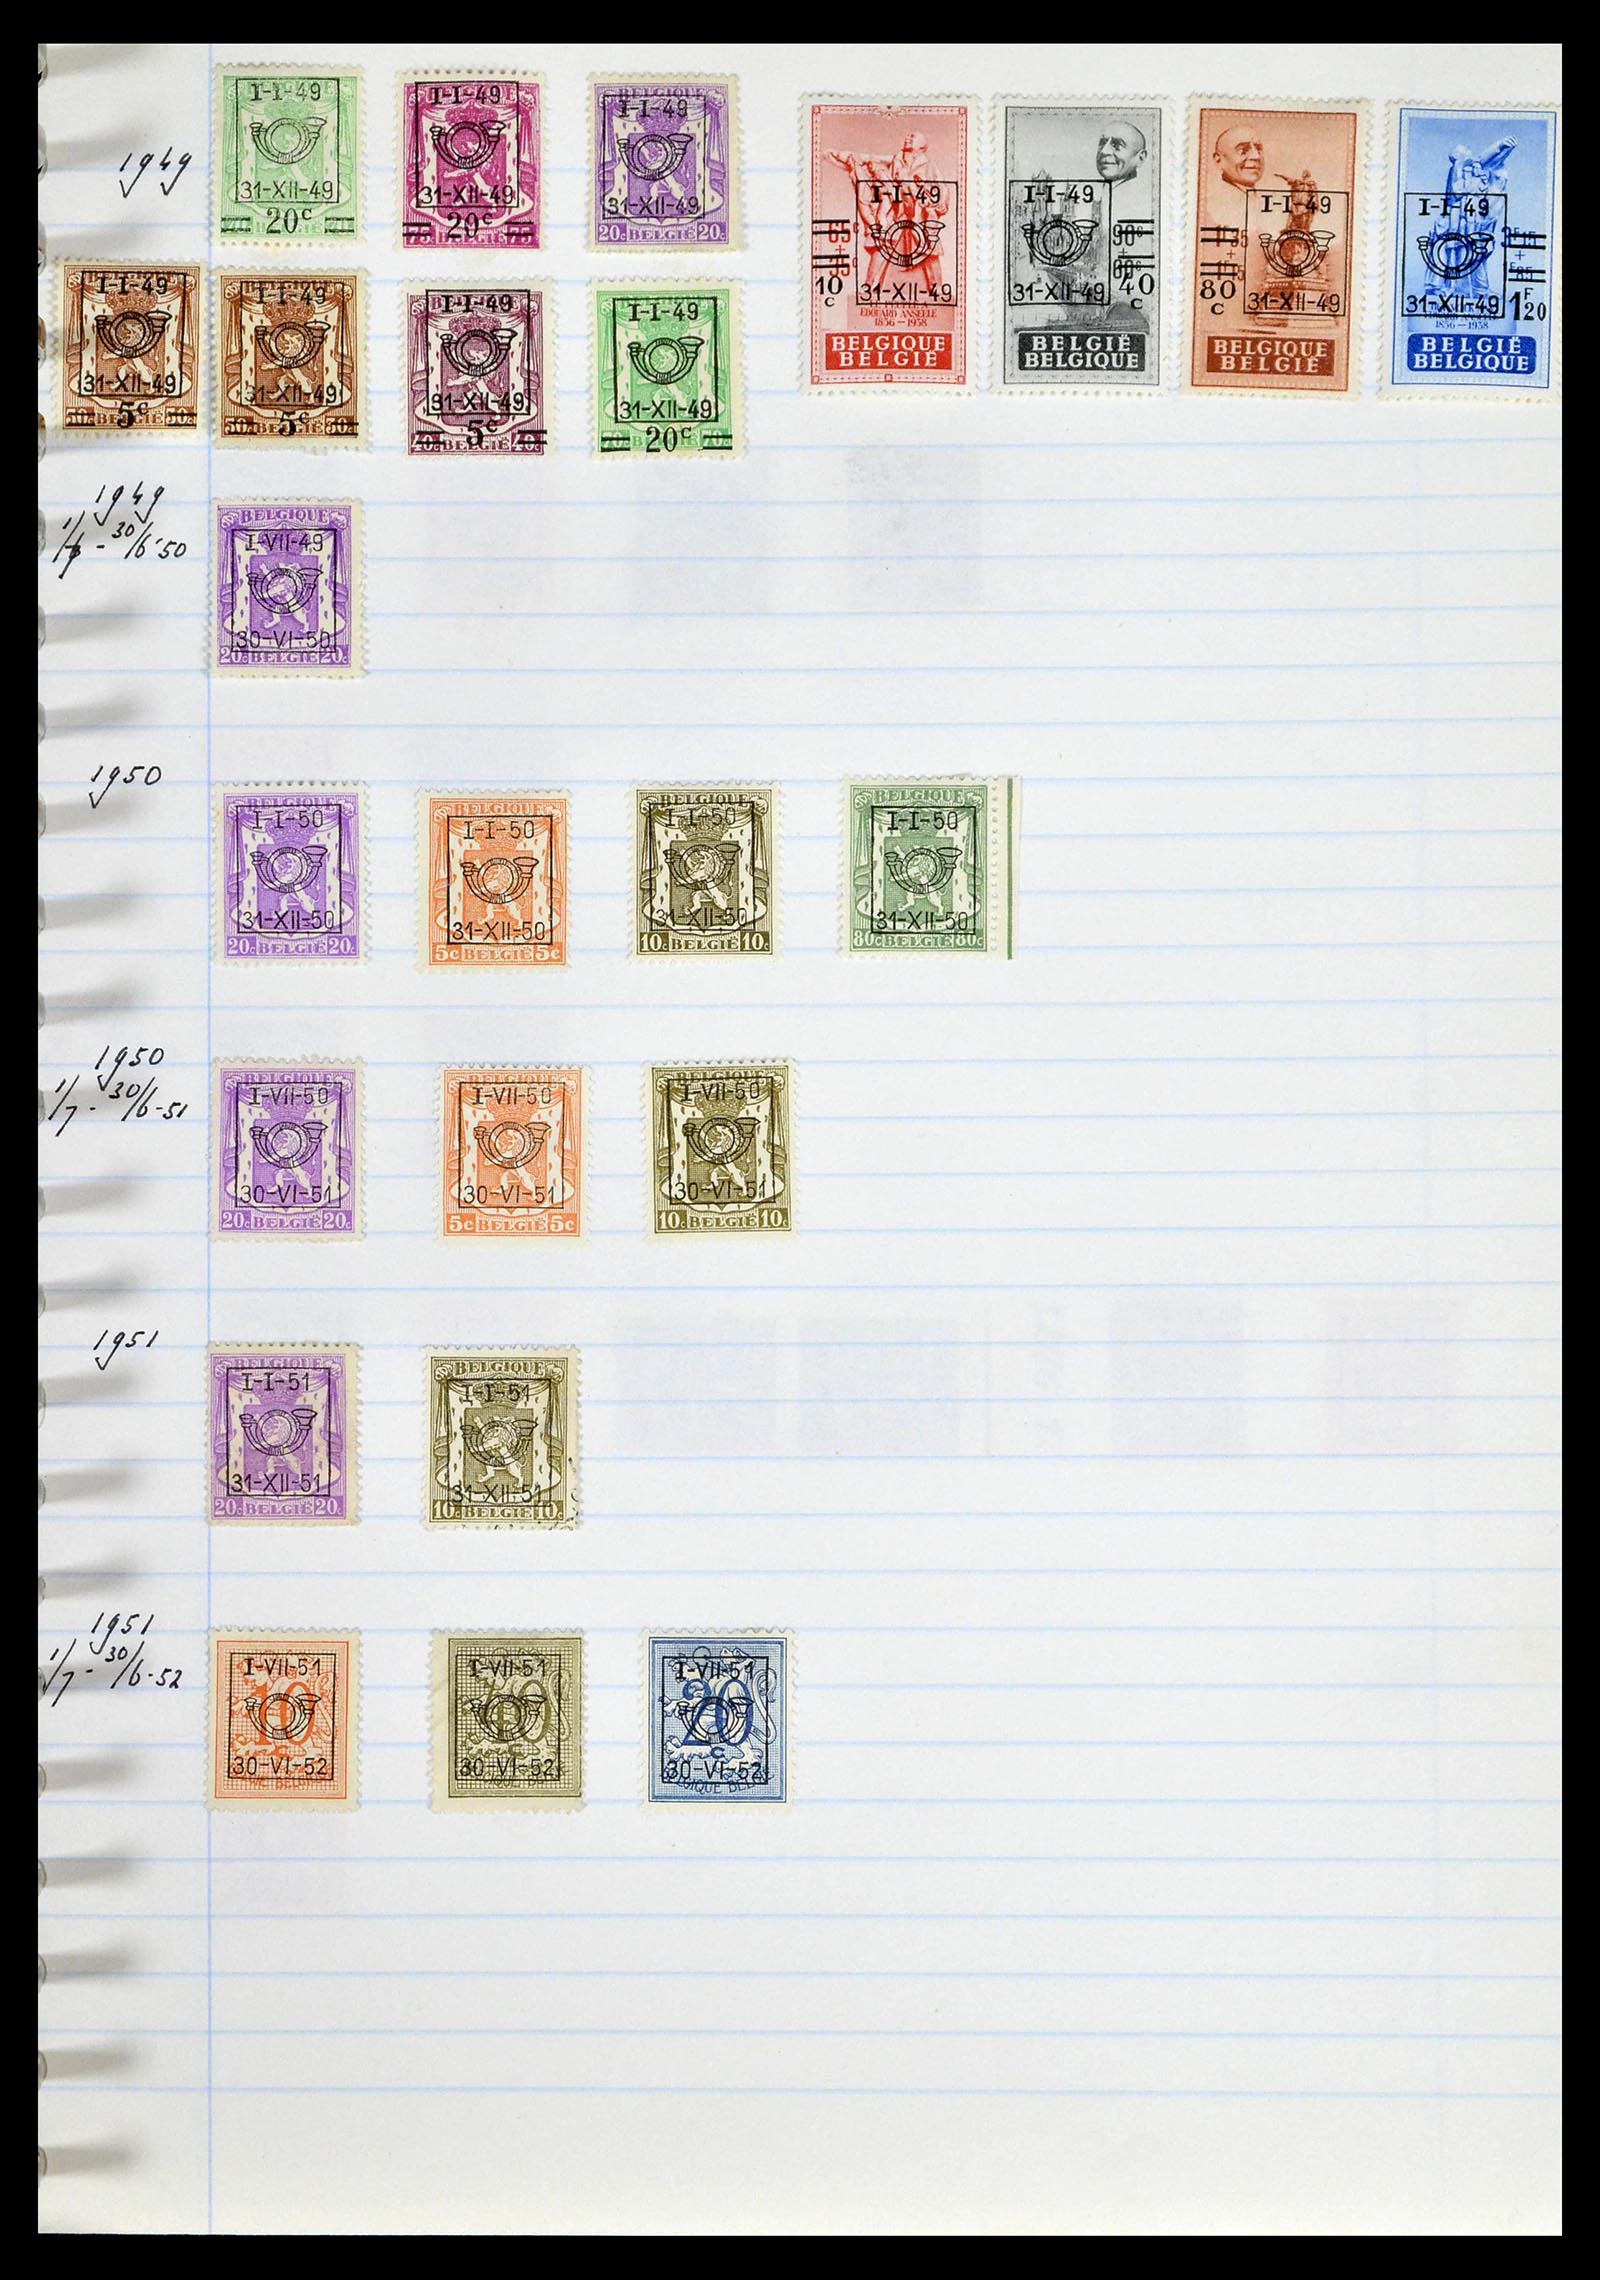 38729 0087 - Stamp collection 38729 Belgium cancels 1849-1950.